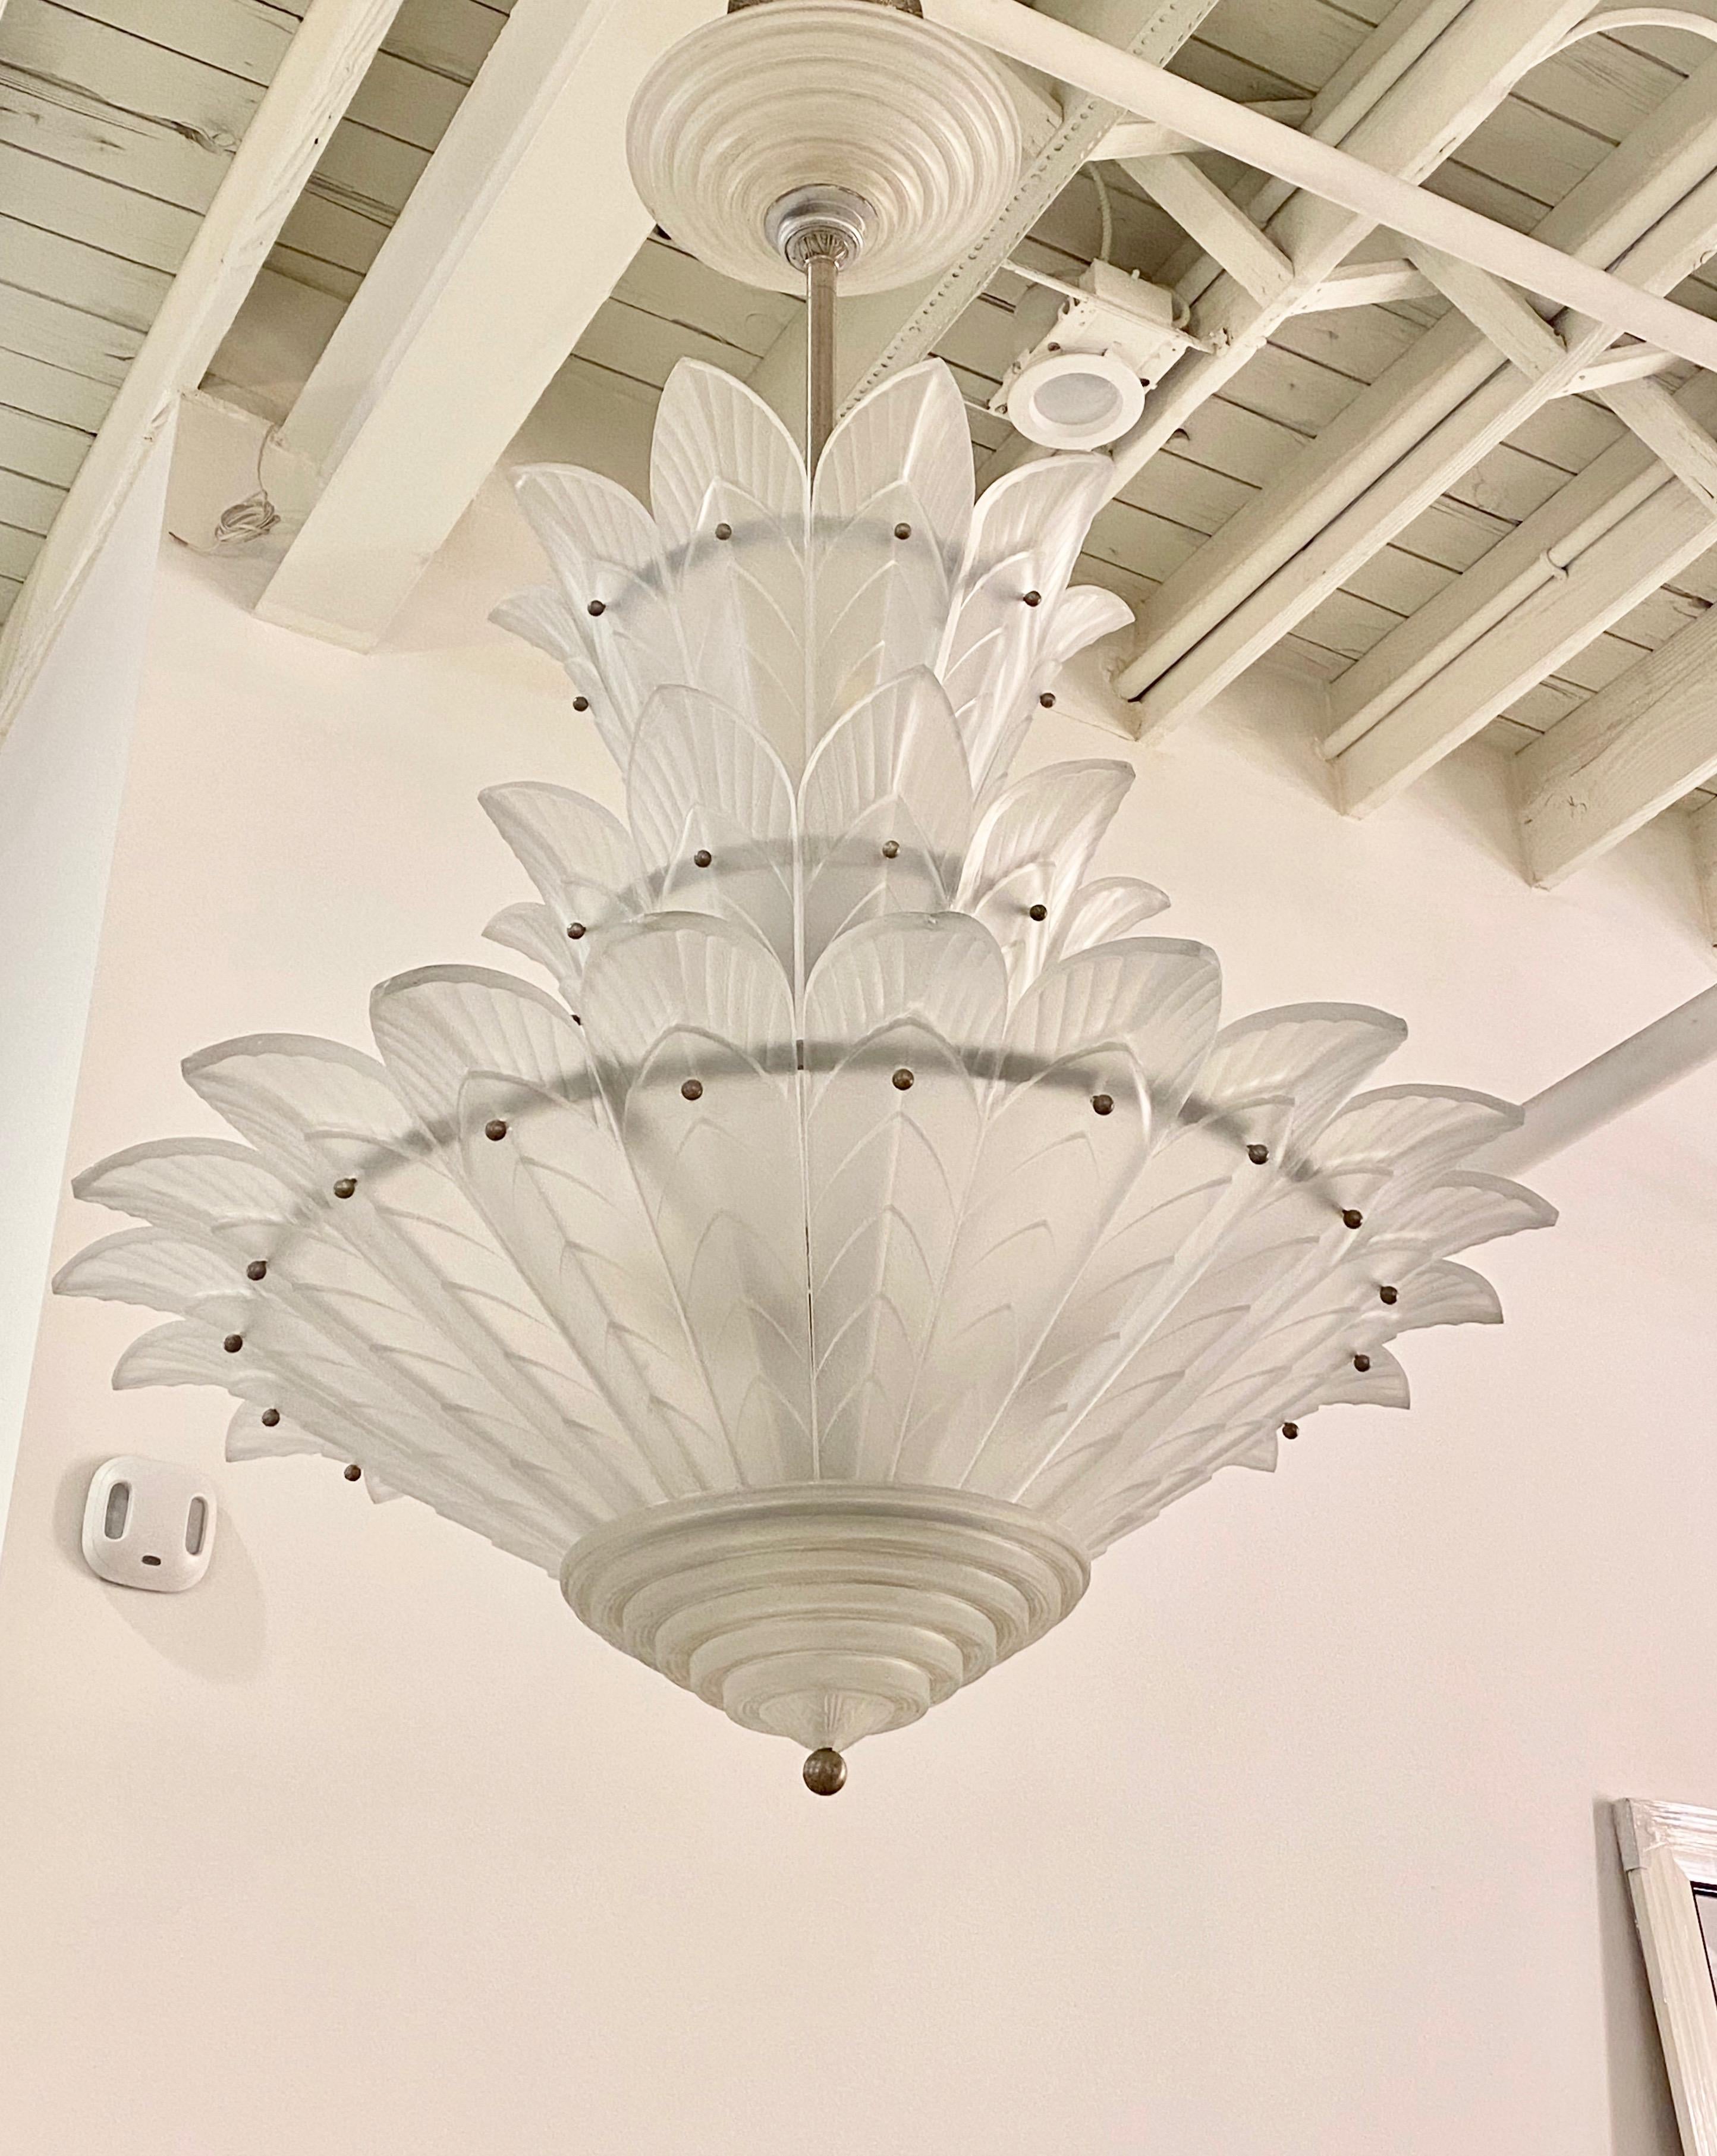 Stunning three tiered French Art Deco chandelier signed by the famous French artist Marius-Ernesto Sabino. Consisting of 38 glass leaf panels in a geometric motif that surround the center glass ribbed bowl with matching glass ceiling plate. The